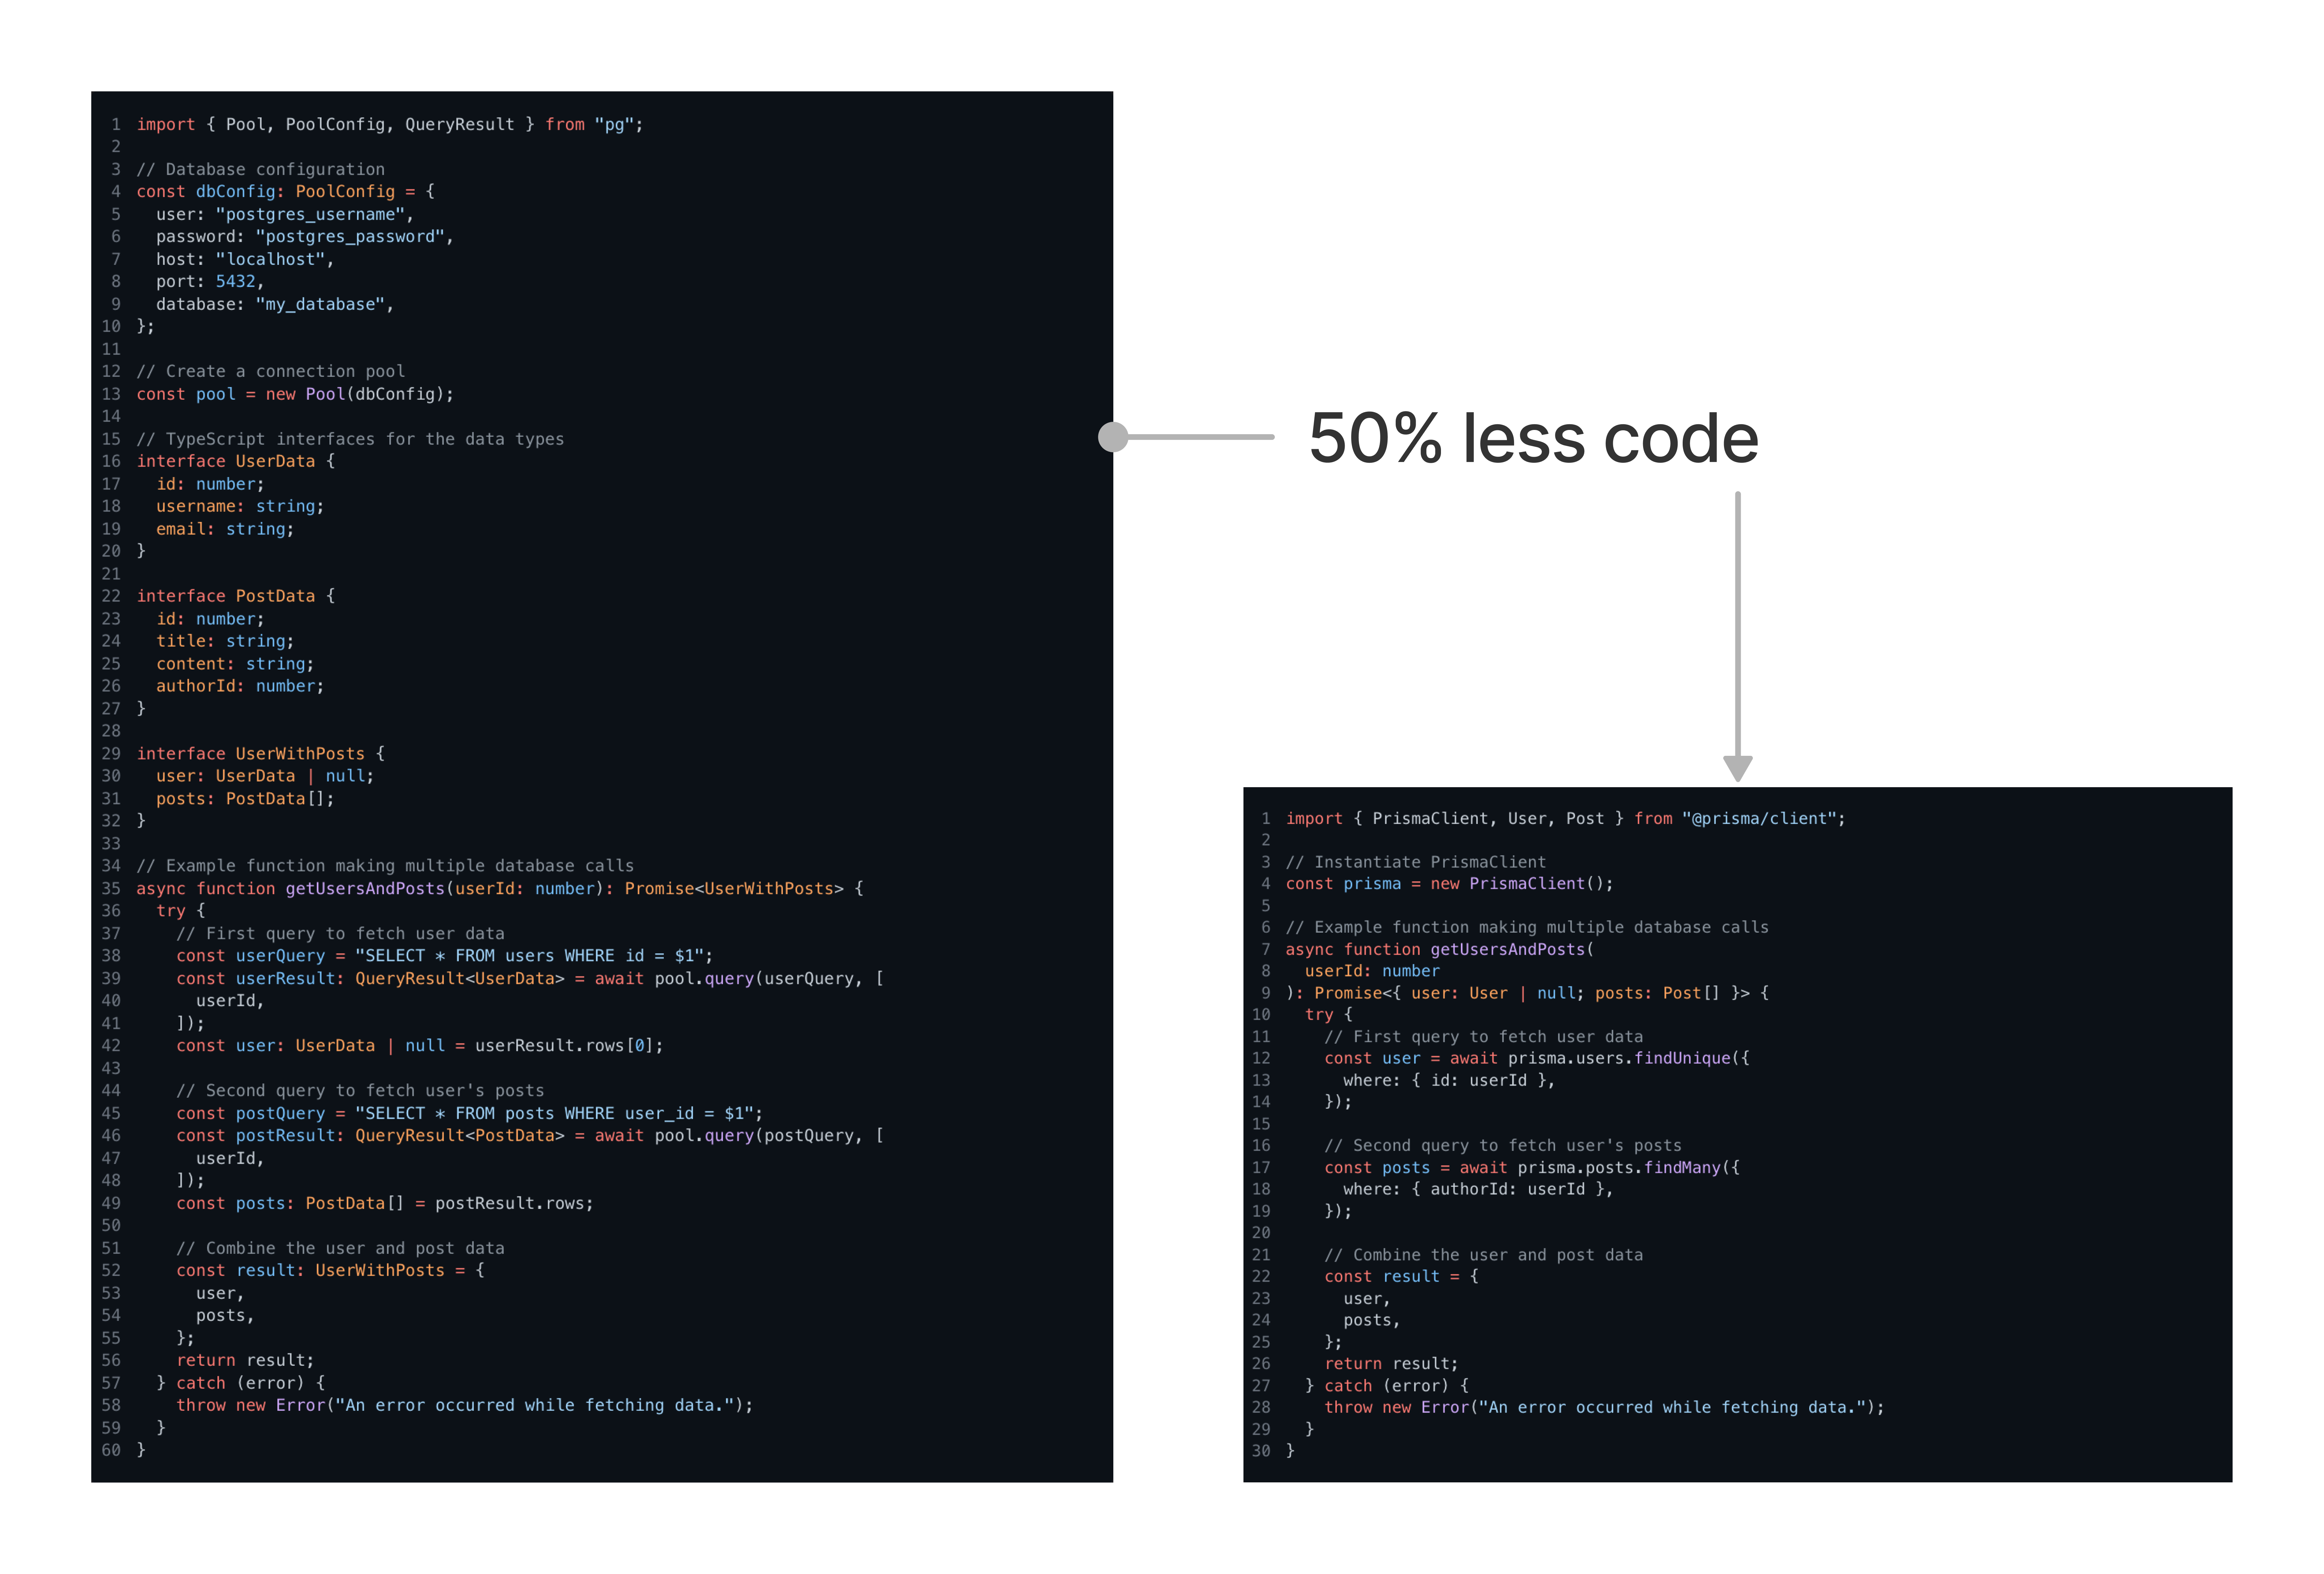 The same function for querying a database in TypeScript using plain-text SQL statements (Left) and Prisma (Right)